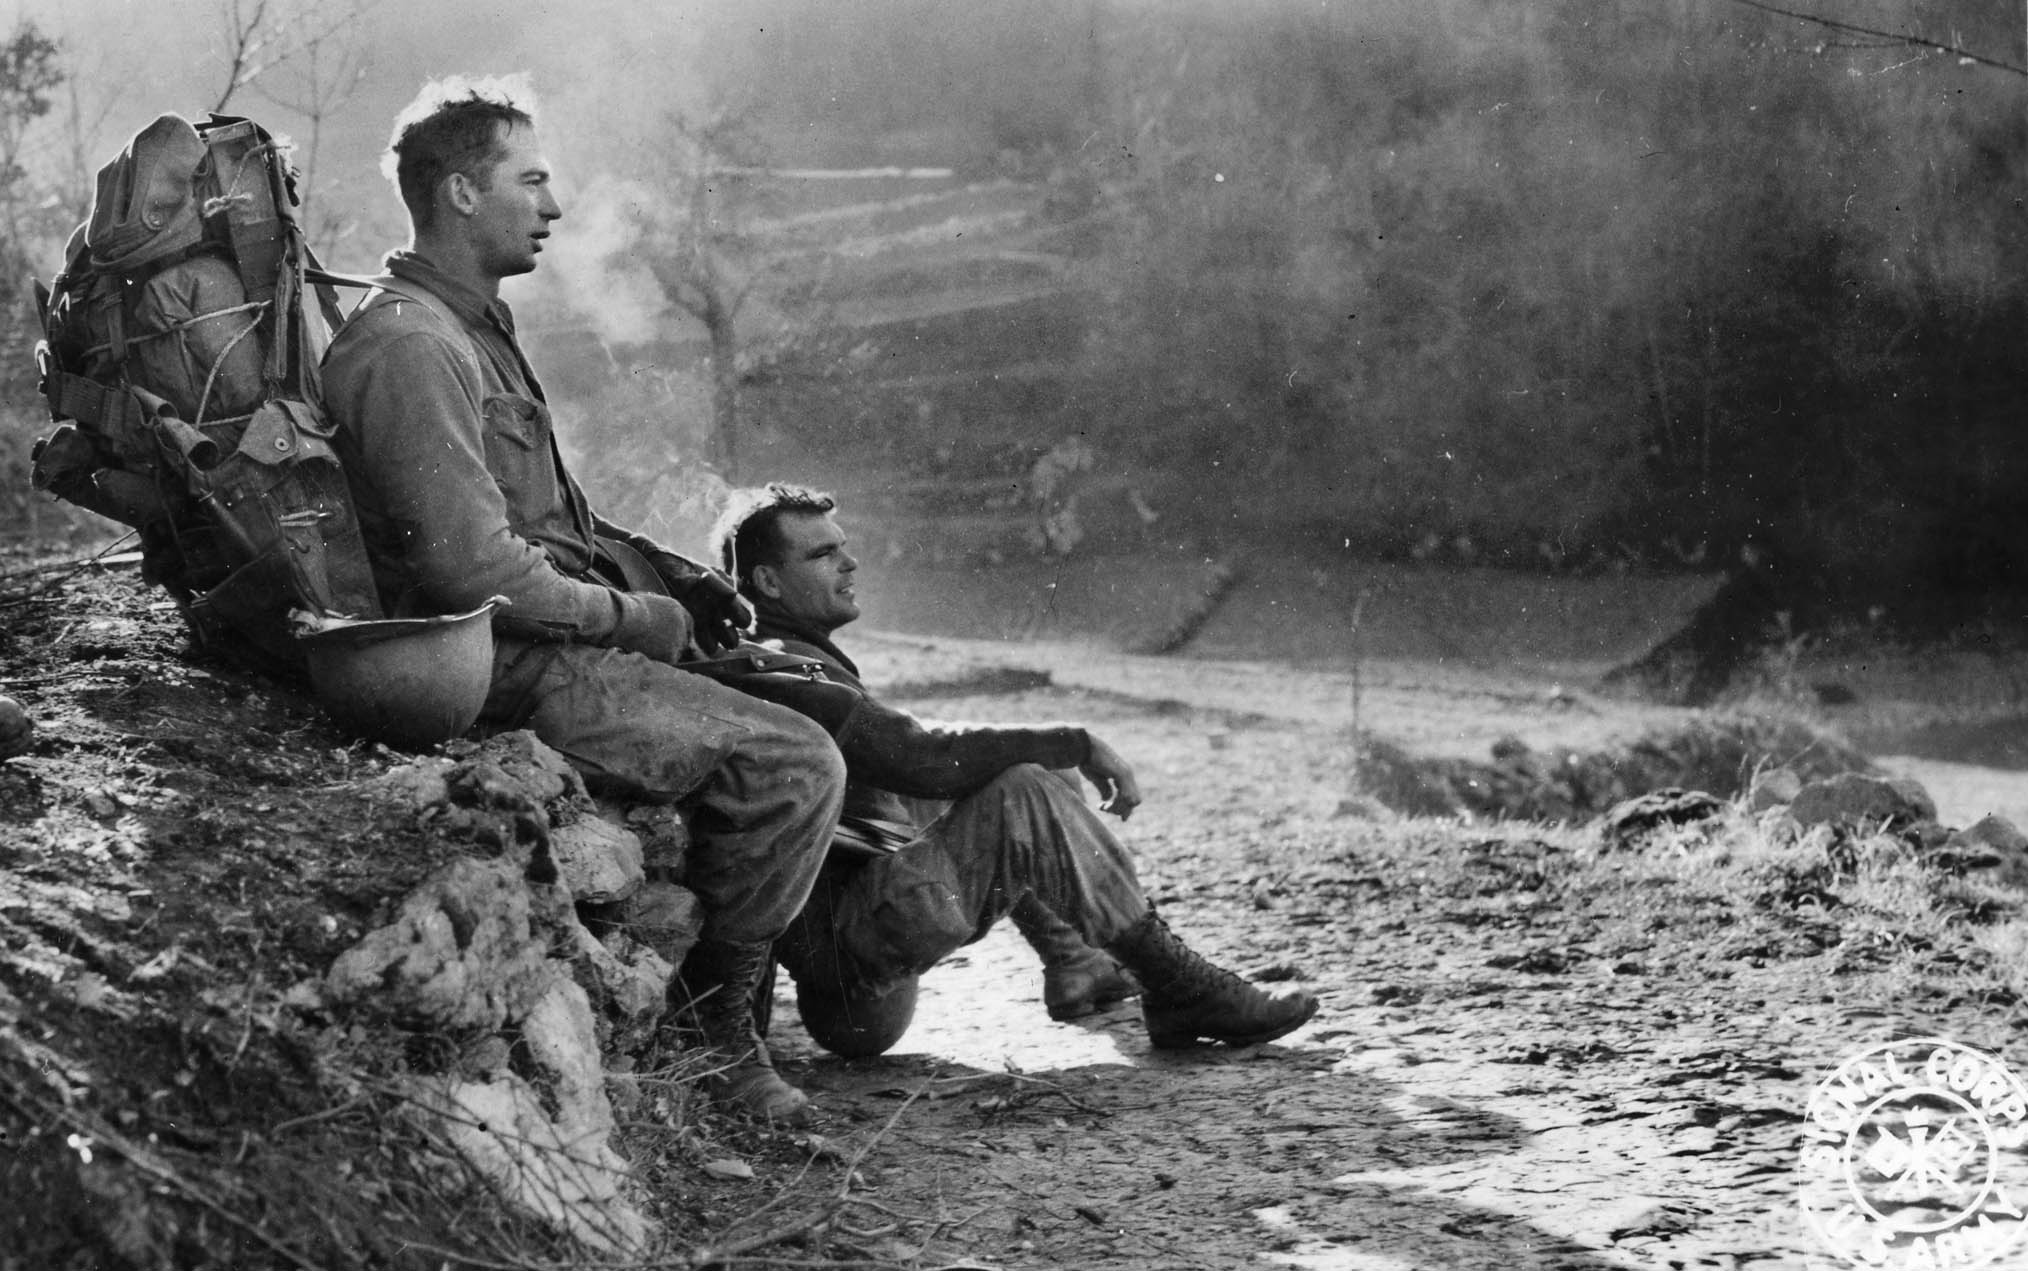 A heavily laden Force man and his buddy take a break during a march near Cevaro, east of Cassino, January 1944. Within a month they would be fighting at Anzio.